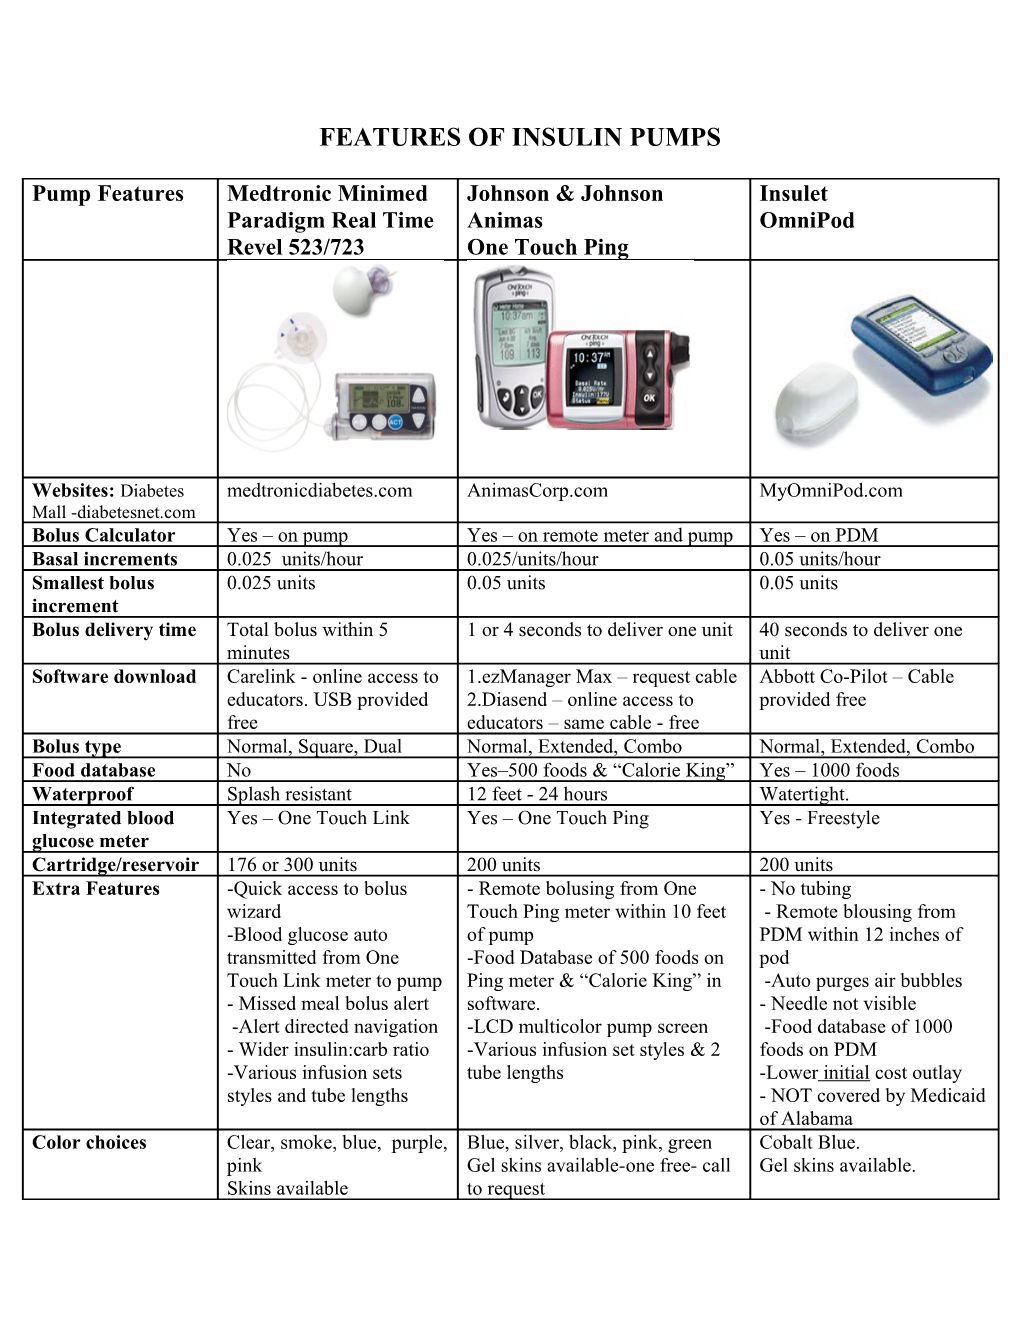 Features of Insulin Pumps